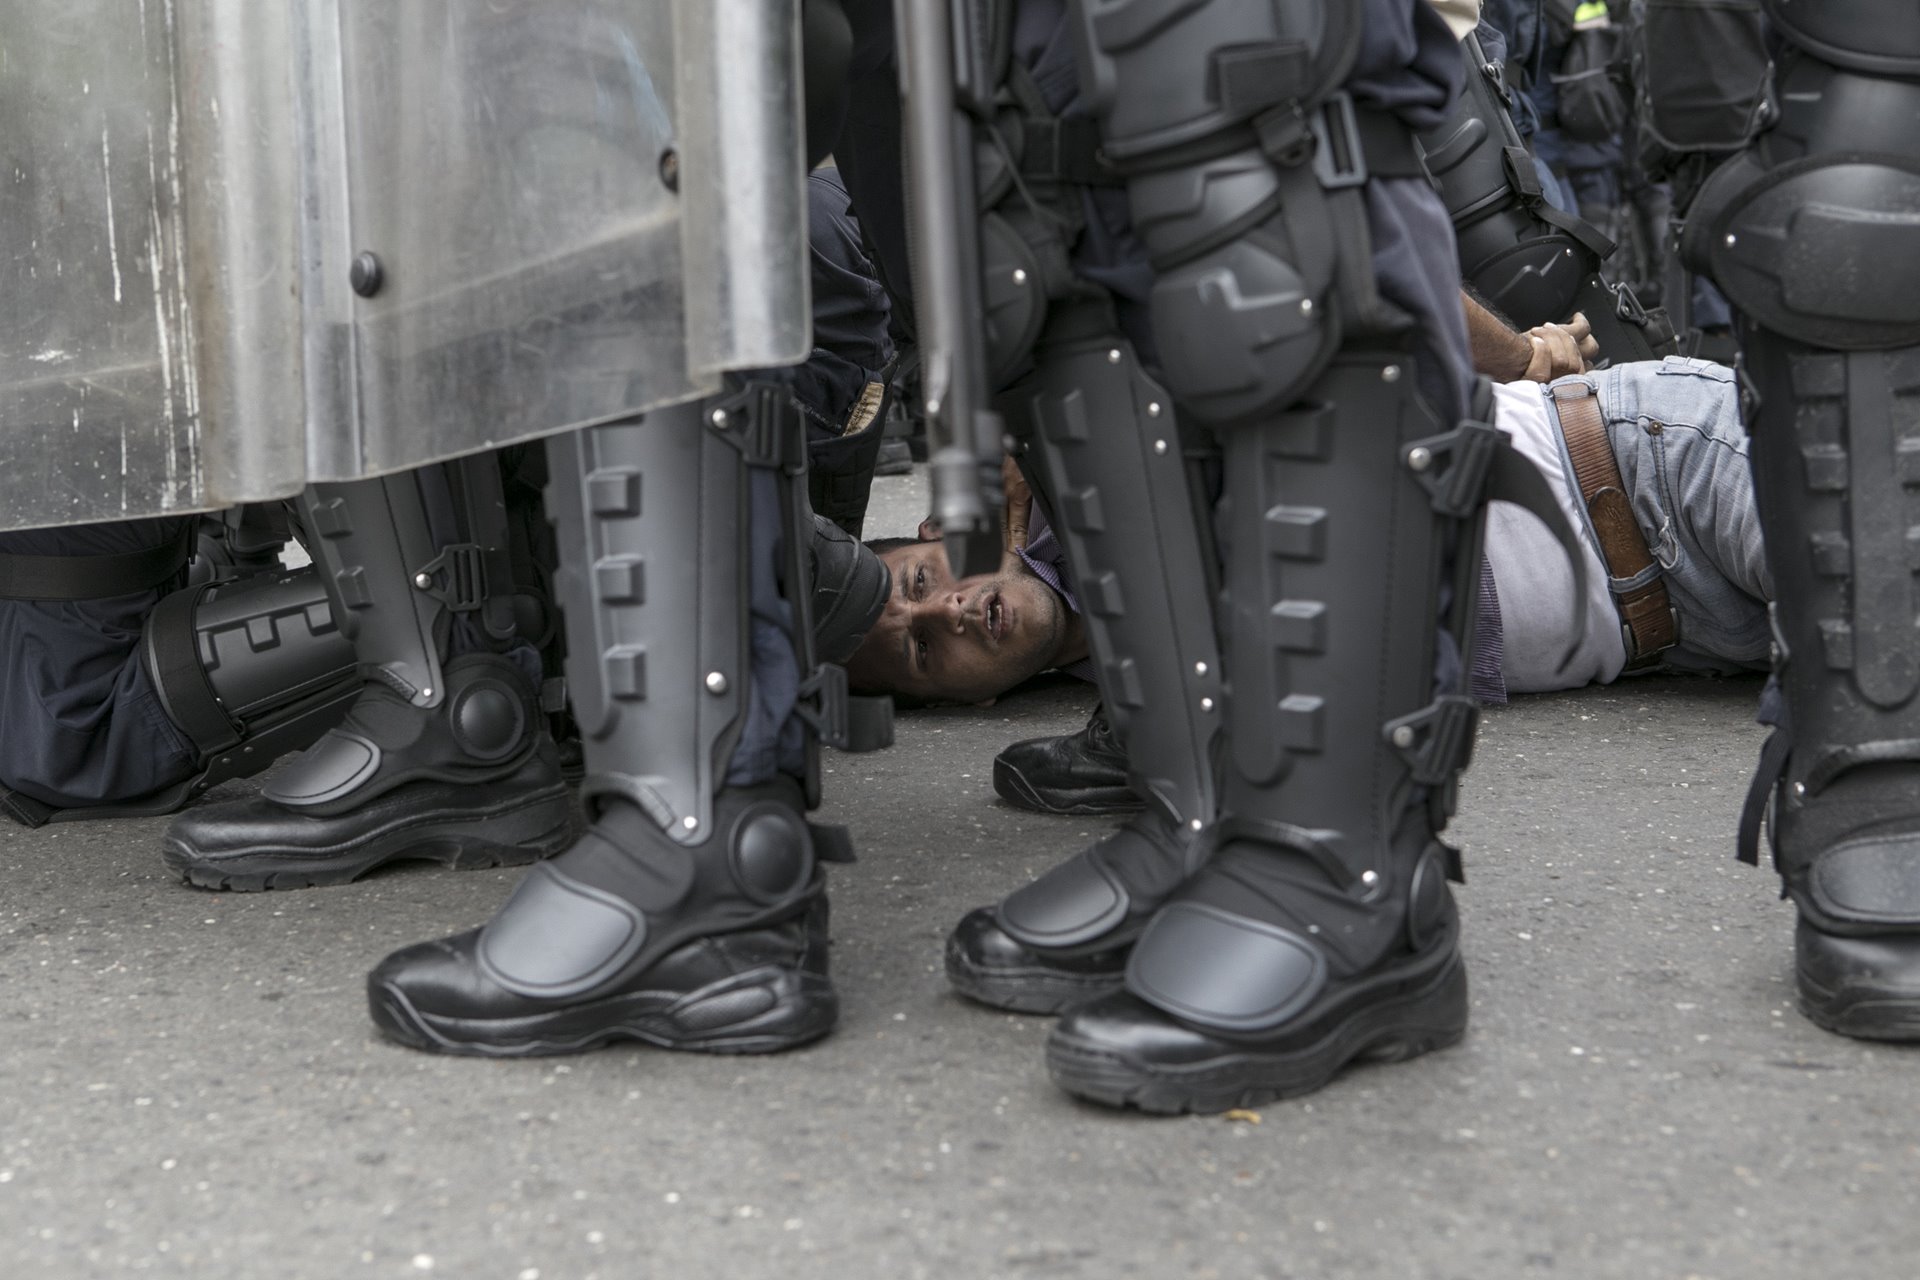 <p>Police arrest a man during a protest rally calling for the removal of President Nicolás Maduro from office, in Caracas, Venezuela.<br />
<br />
Nicolás Maduro, Hugo Chávez&rsquo;s chosen successor, was elected president by a narrow margin in 2013, but opposition parties contested the result. Protests, contested elections, and accusations of vote-rigging continued throughout the years that followed, with opponents of Maduro blaming him for Venezuela&#39;s economic crisis.&nbsp;</p>
